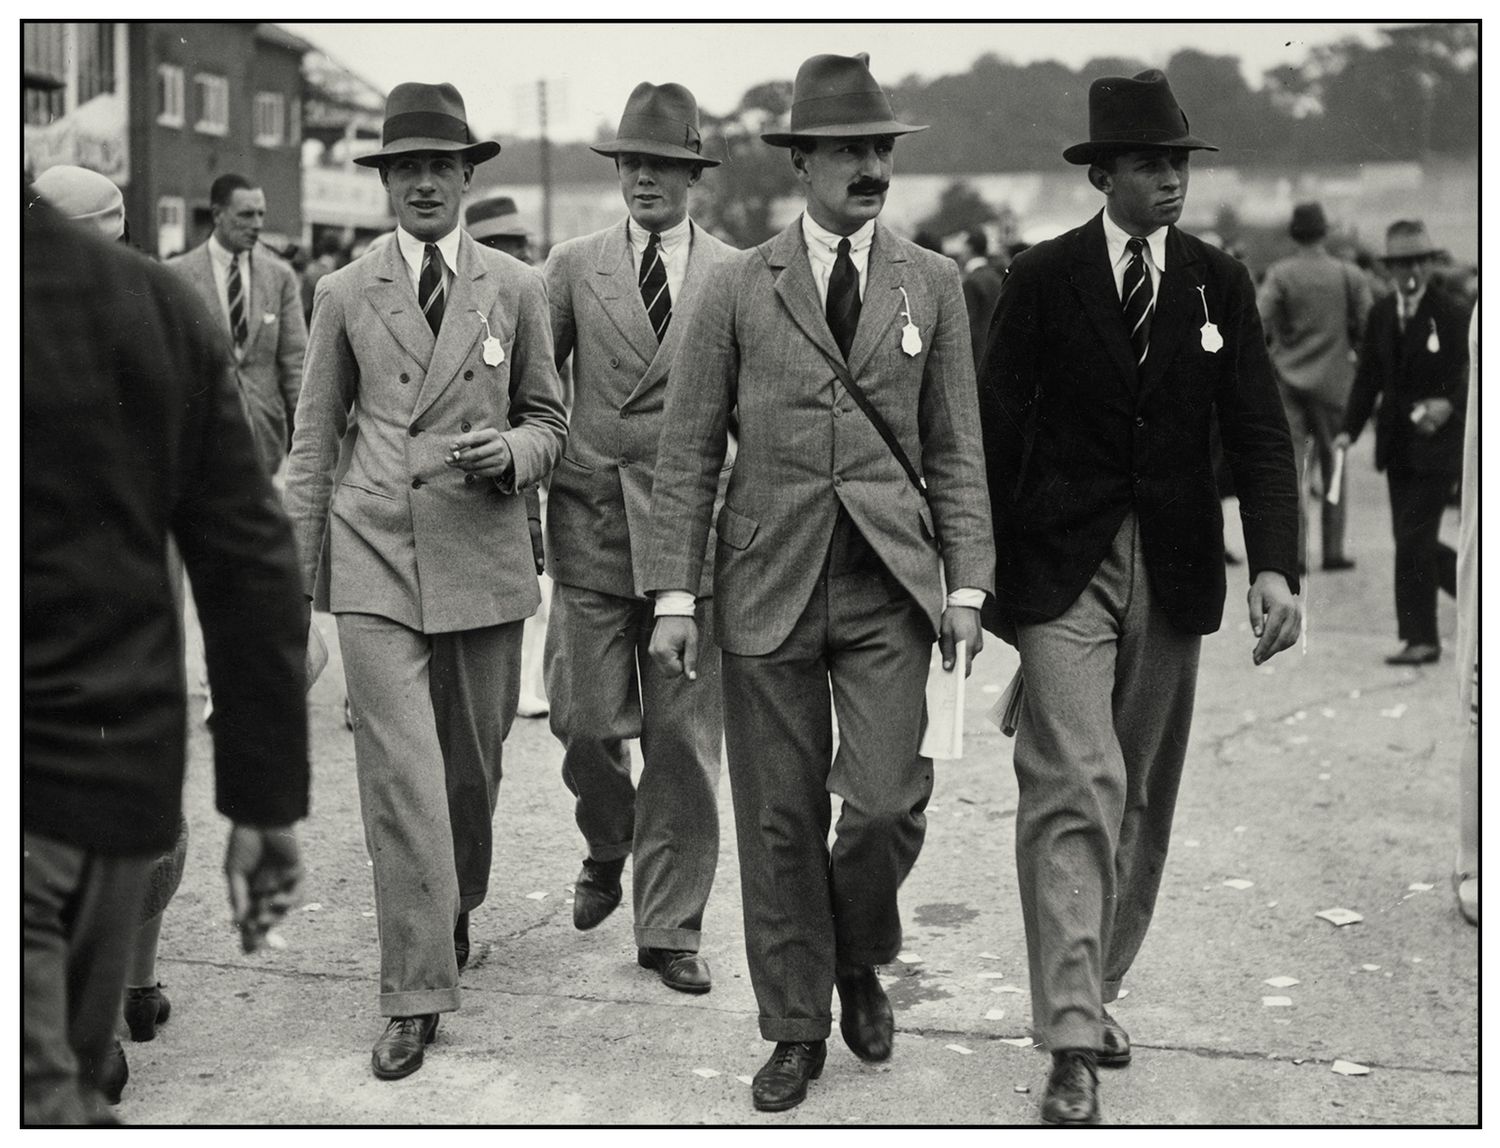 10 Style Lessons From The 1920s (That’ll Come In Handy Today) | The ...